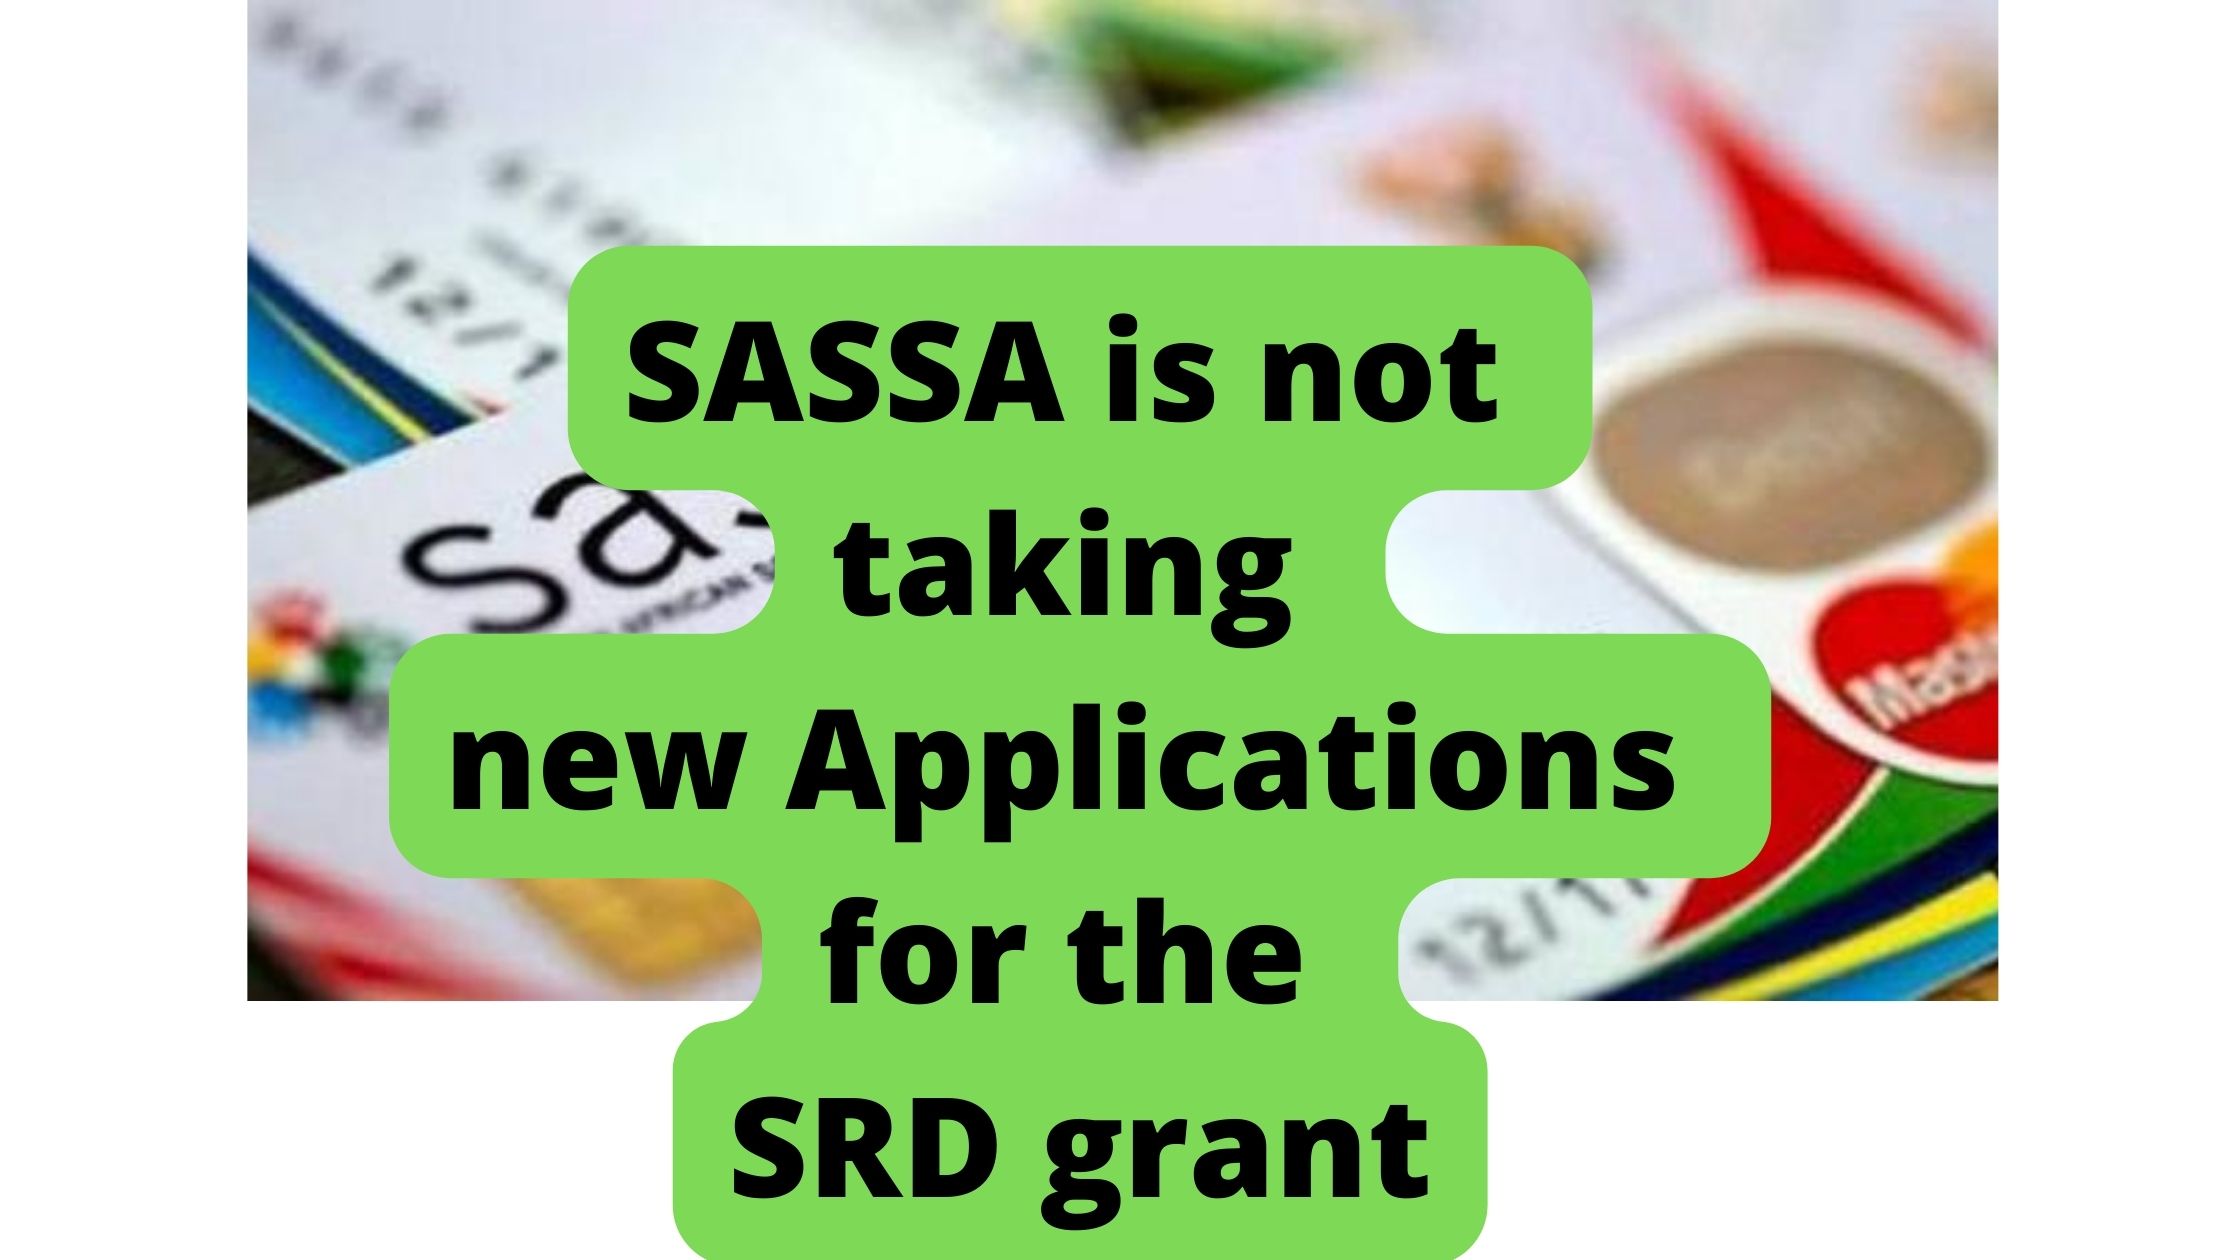 SASSA is not taking new Applications for the SRD grant